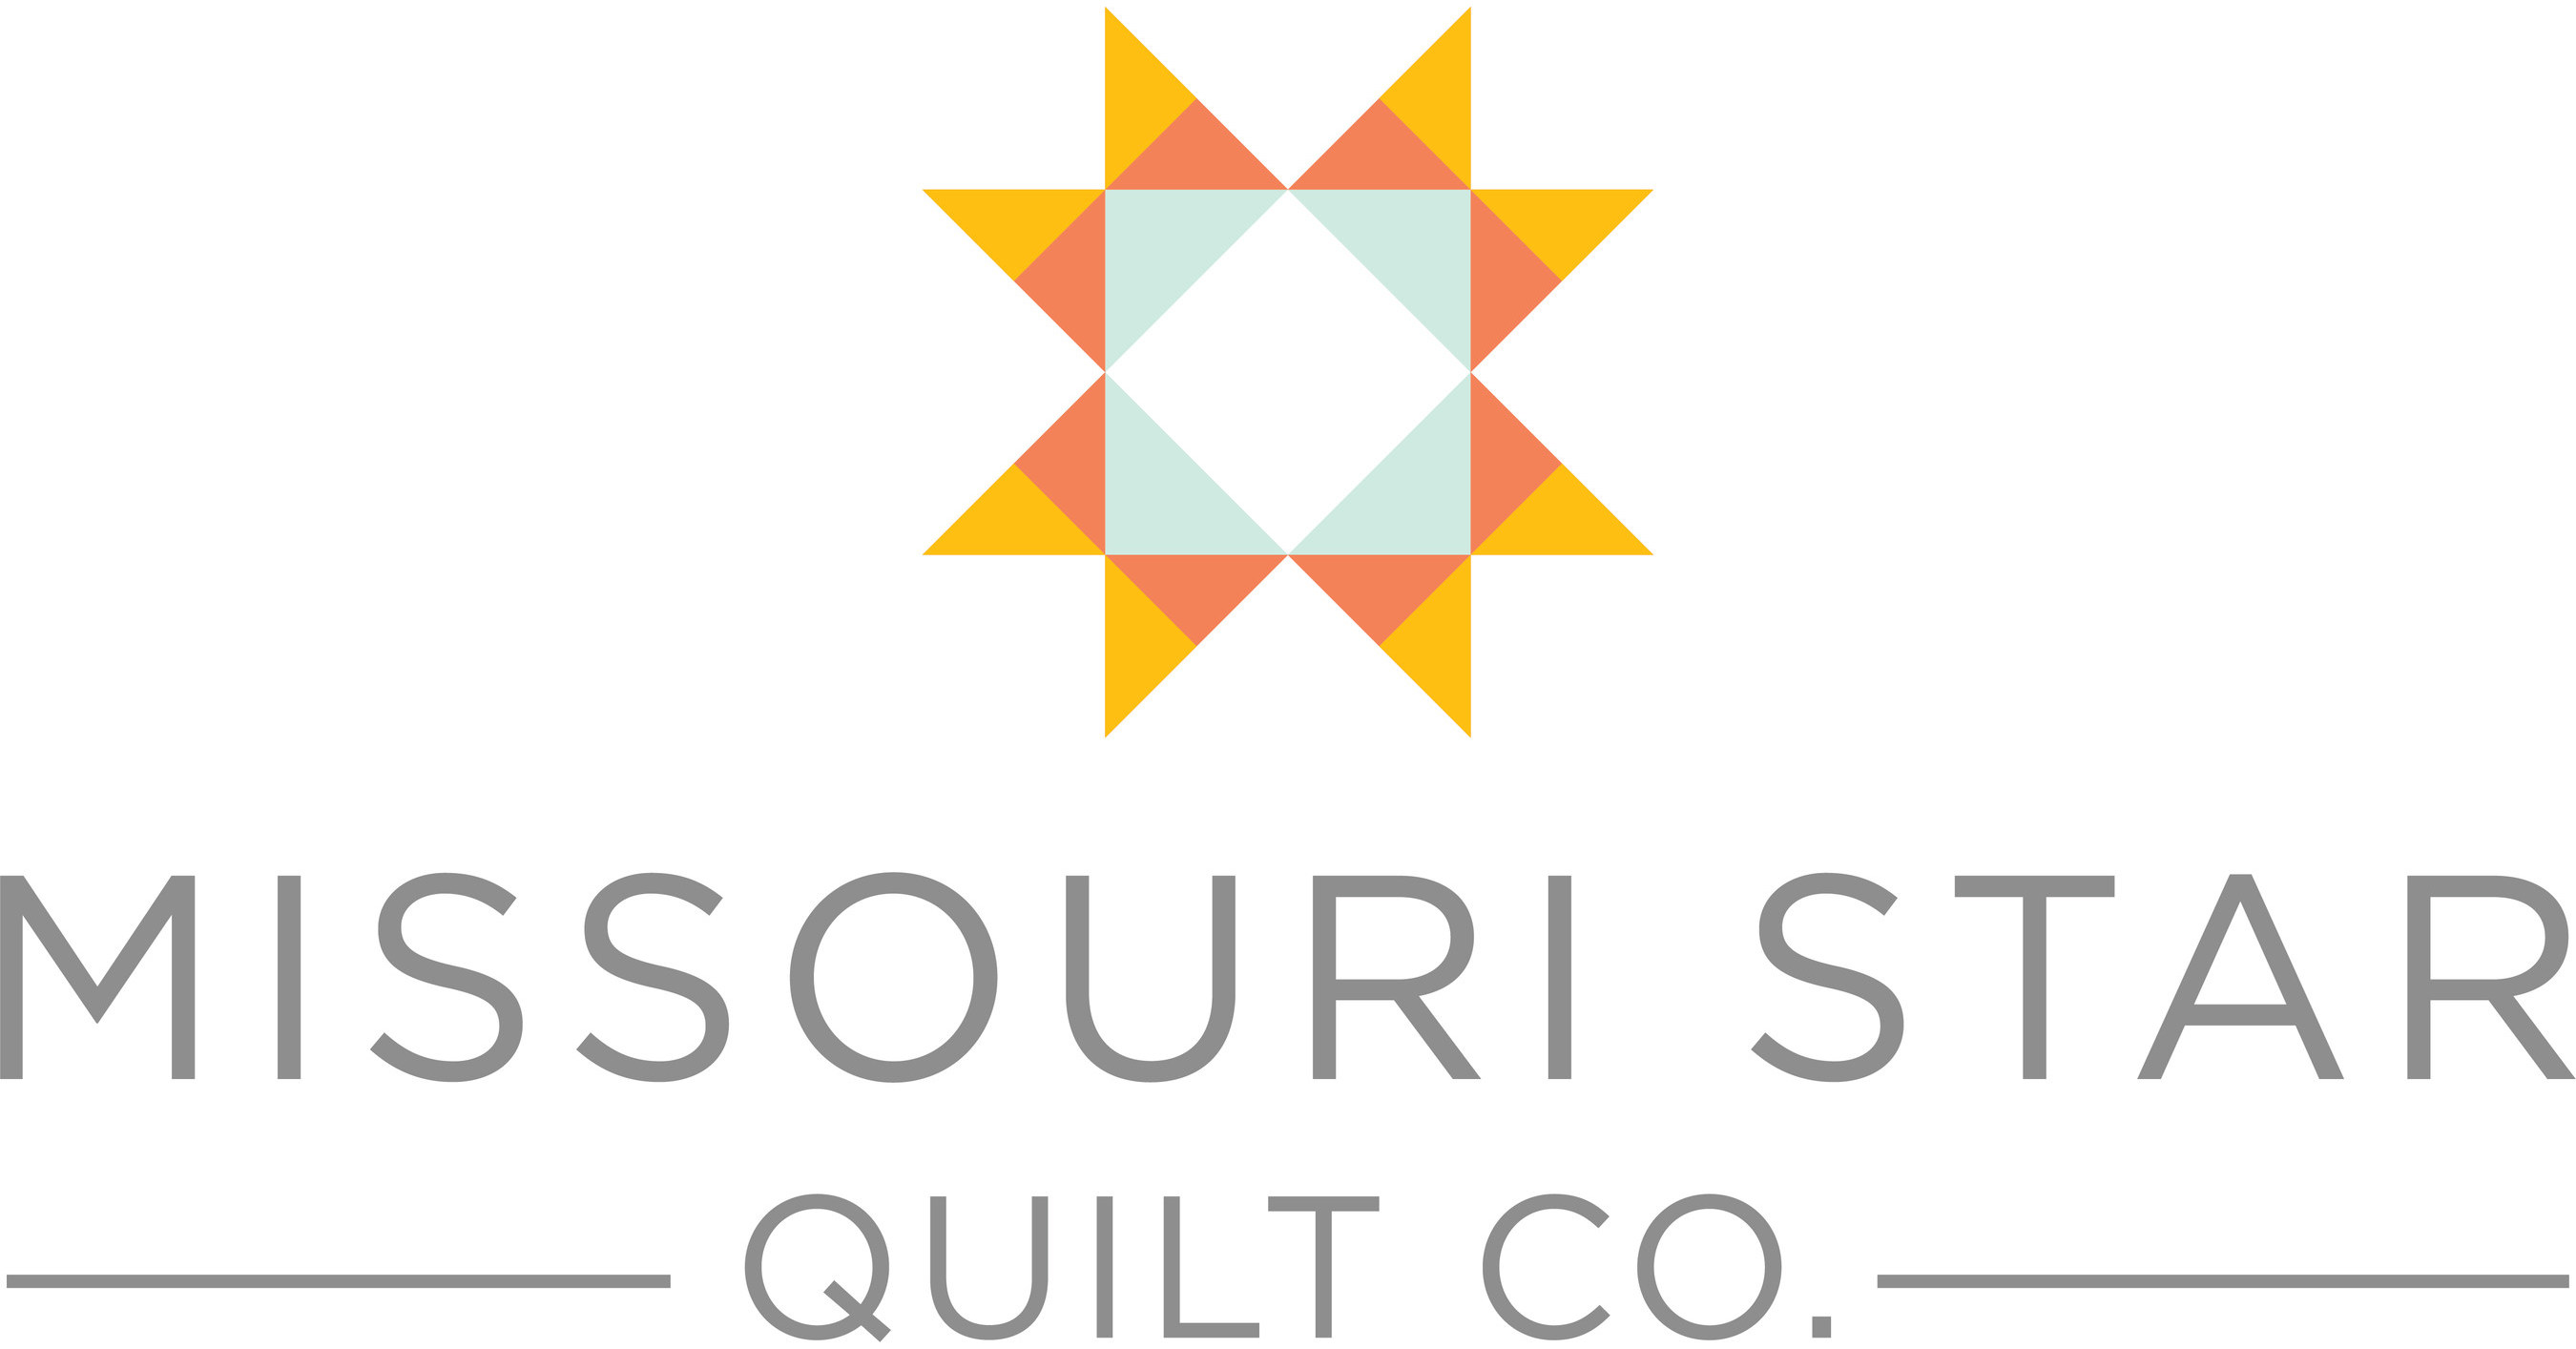 Some Companies Grow Jobs in America, Brick by Brick. Missouri Star Quilt Co.  Is Doing It Quilt by Quilt